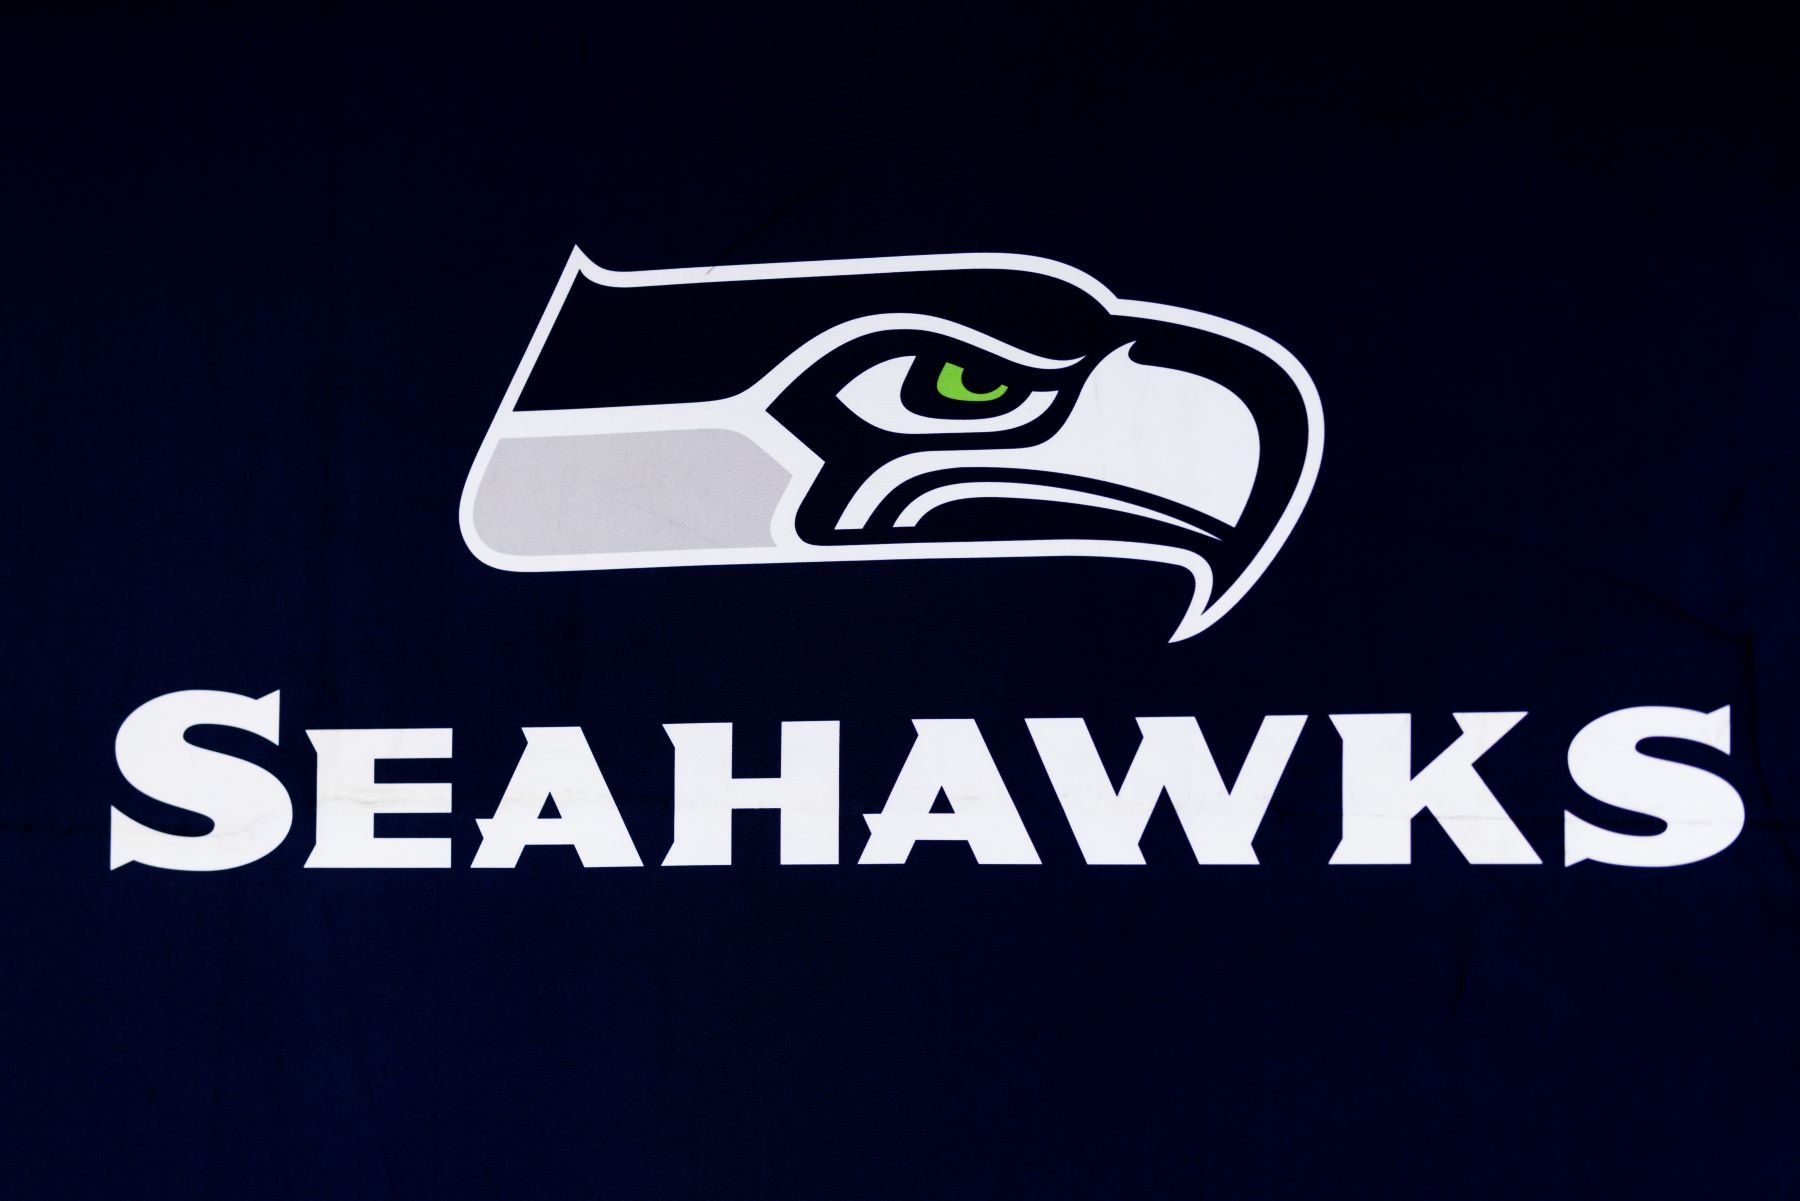 Seattle Seahawks logo seen at the Los Angeles Convention Center during the Super Bowl Experience